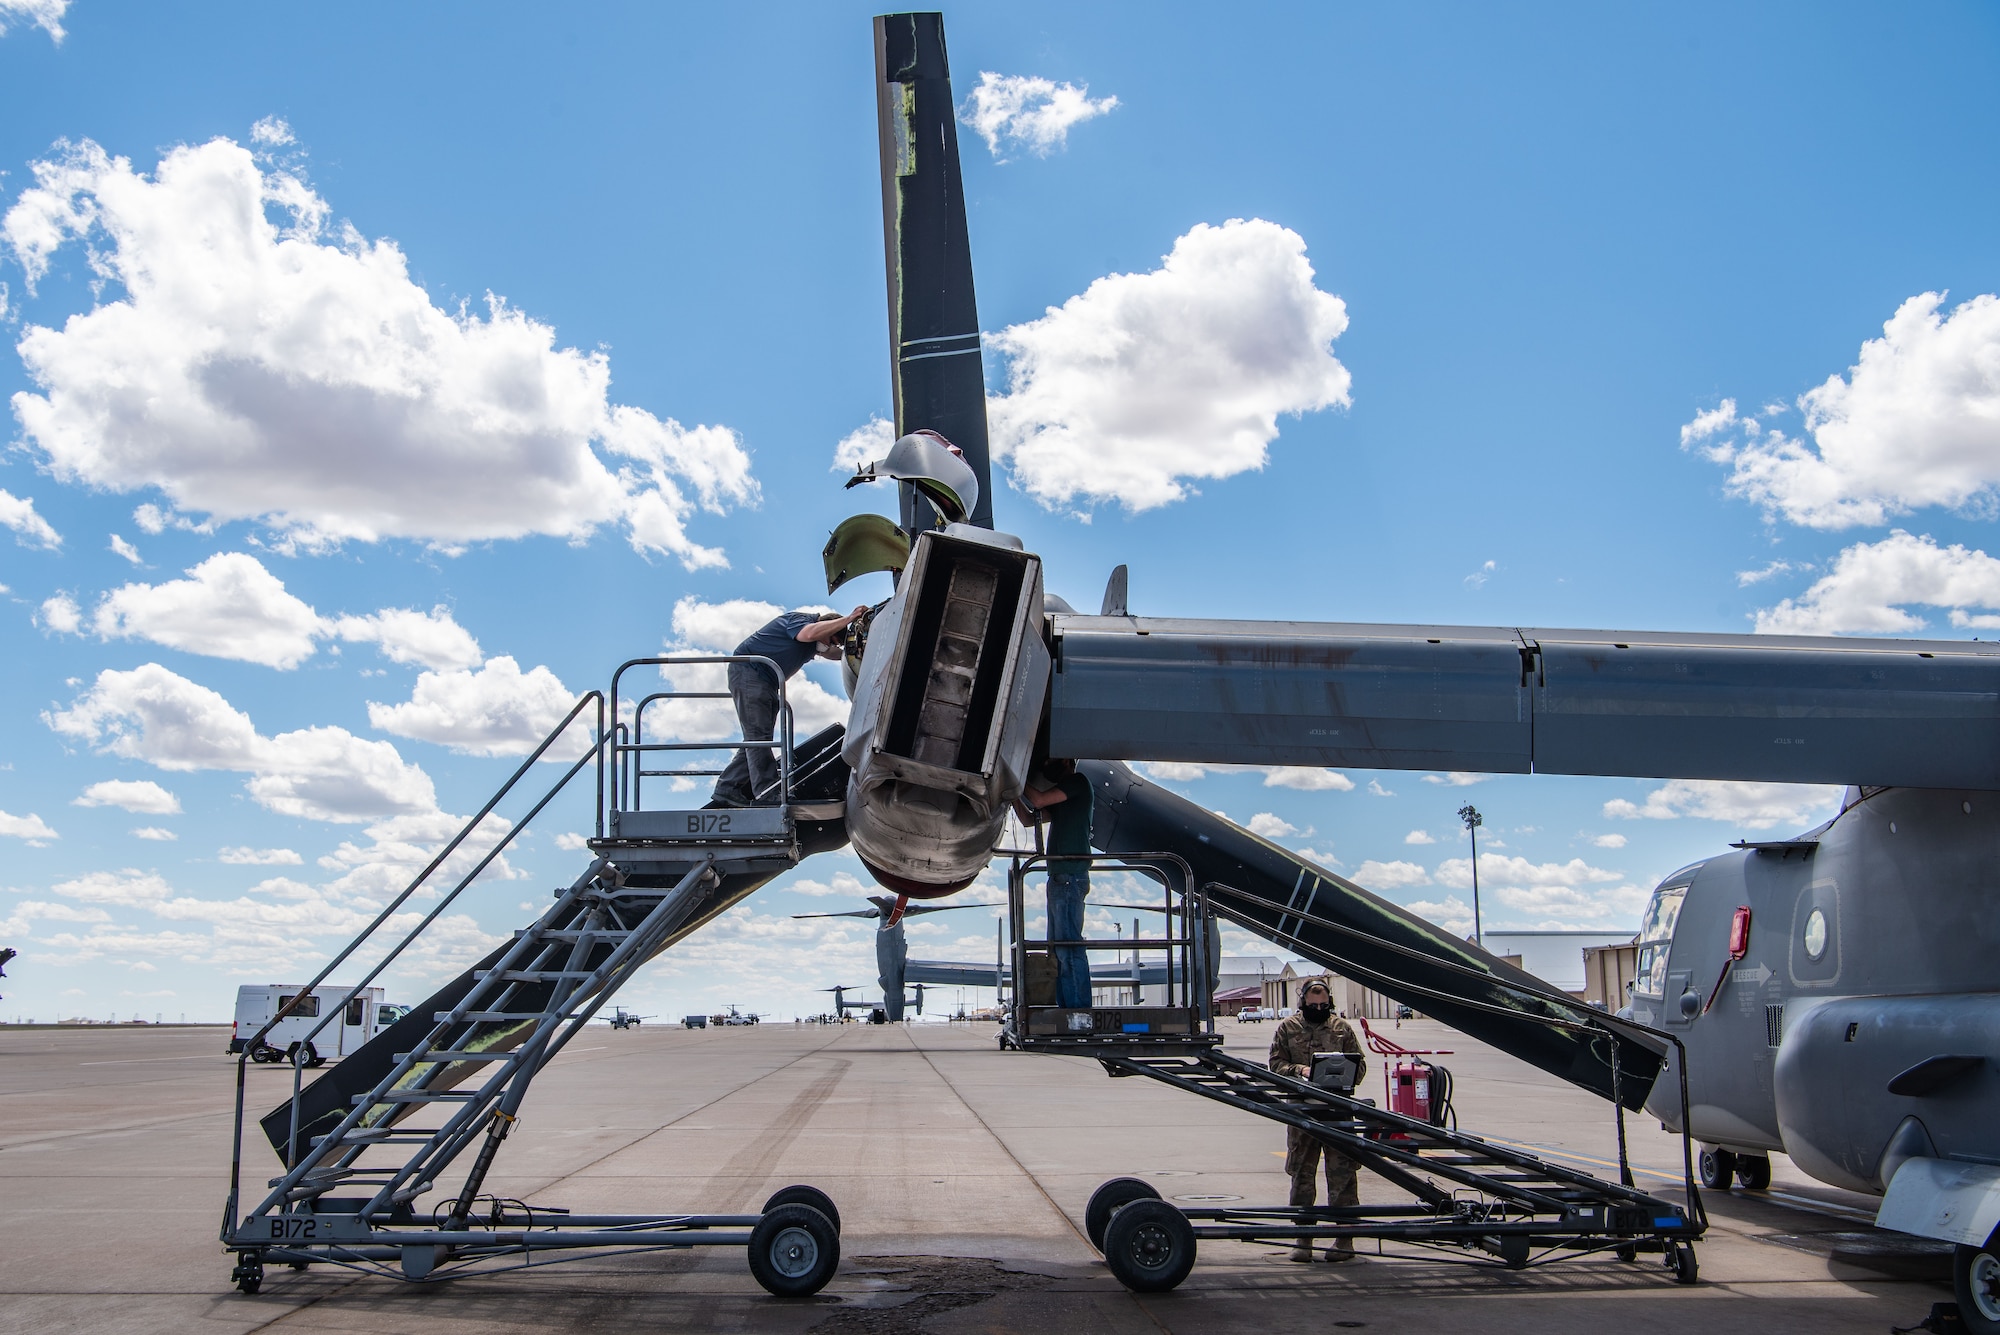 An Airman works on the wing of a CV-22 Osprey